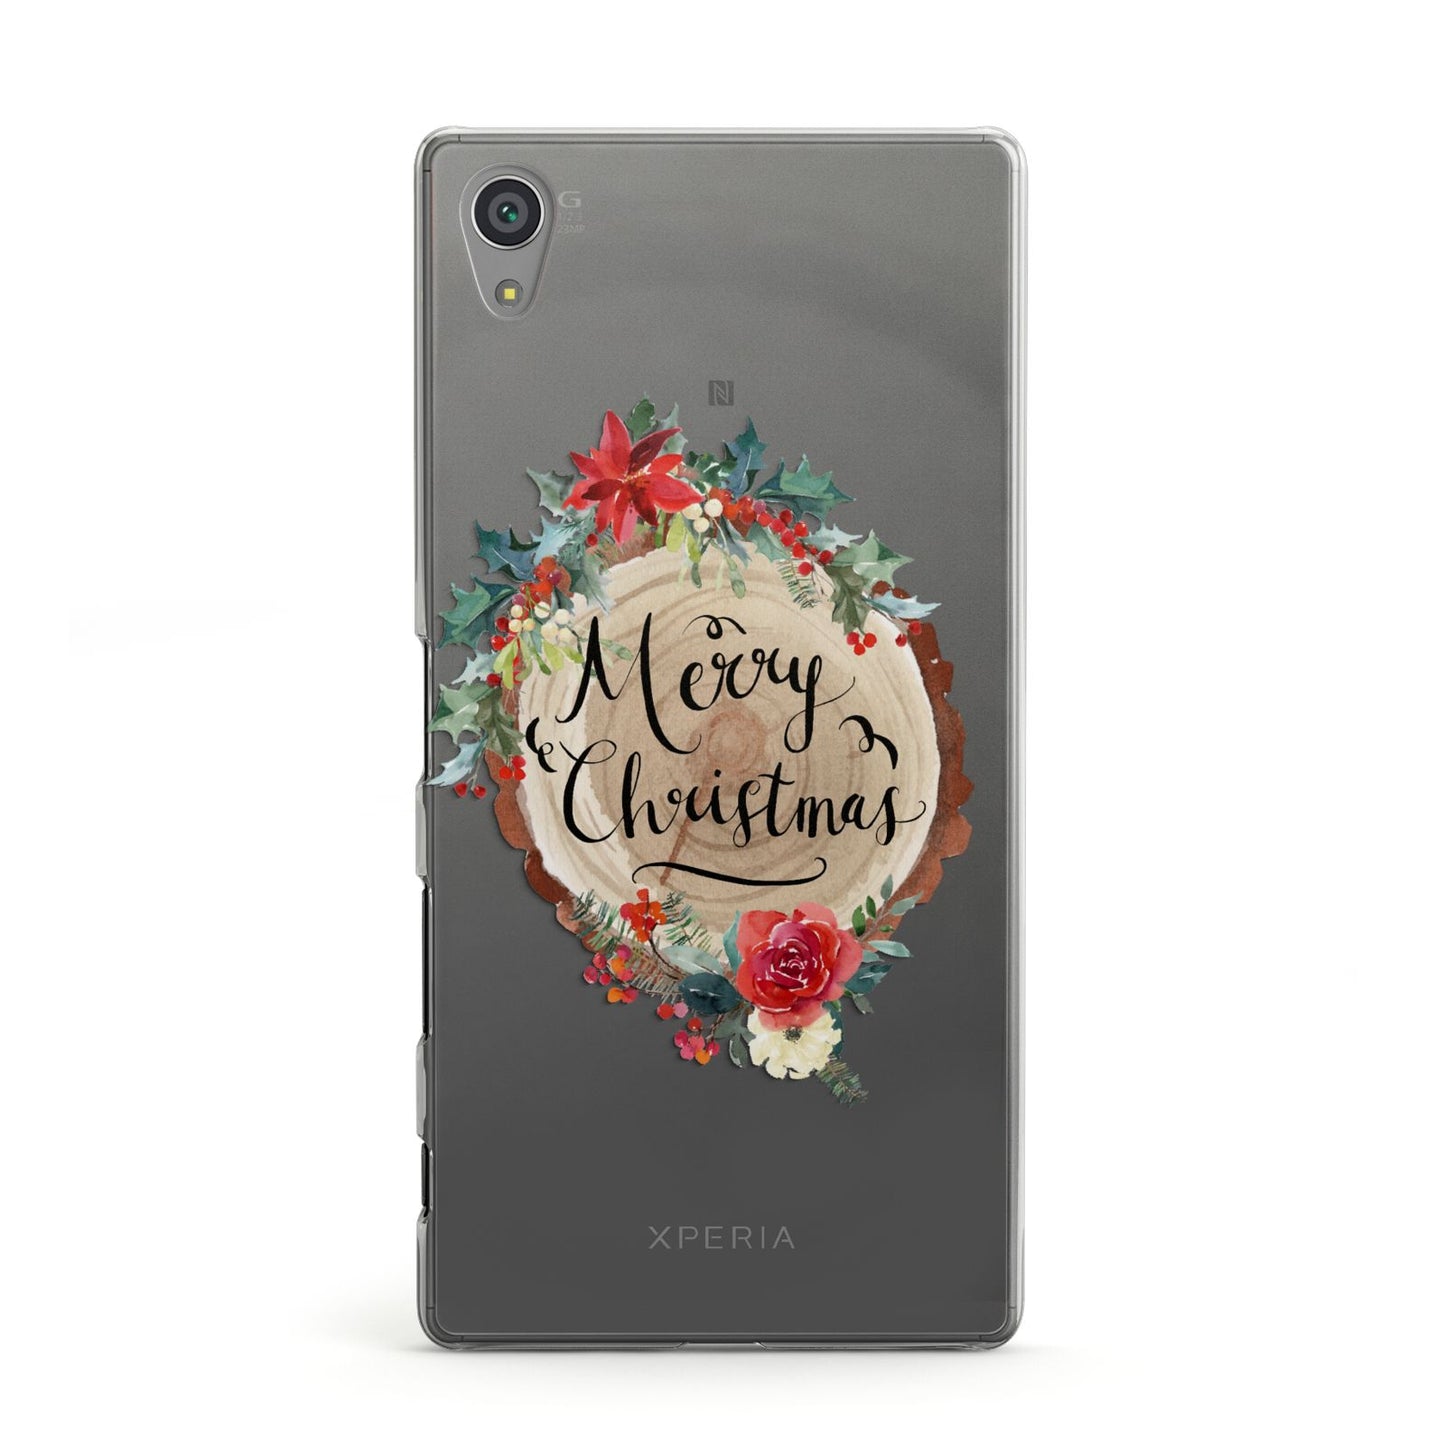 Merry Christmas Log Floral Sony Xperia Case